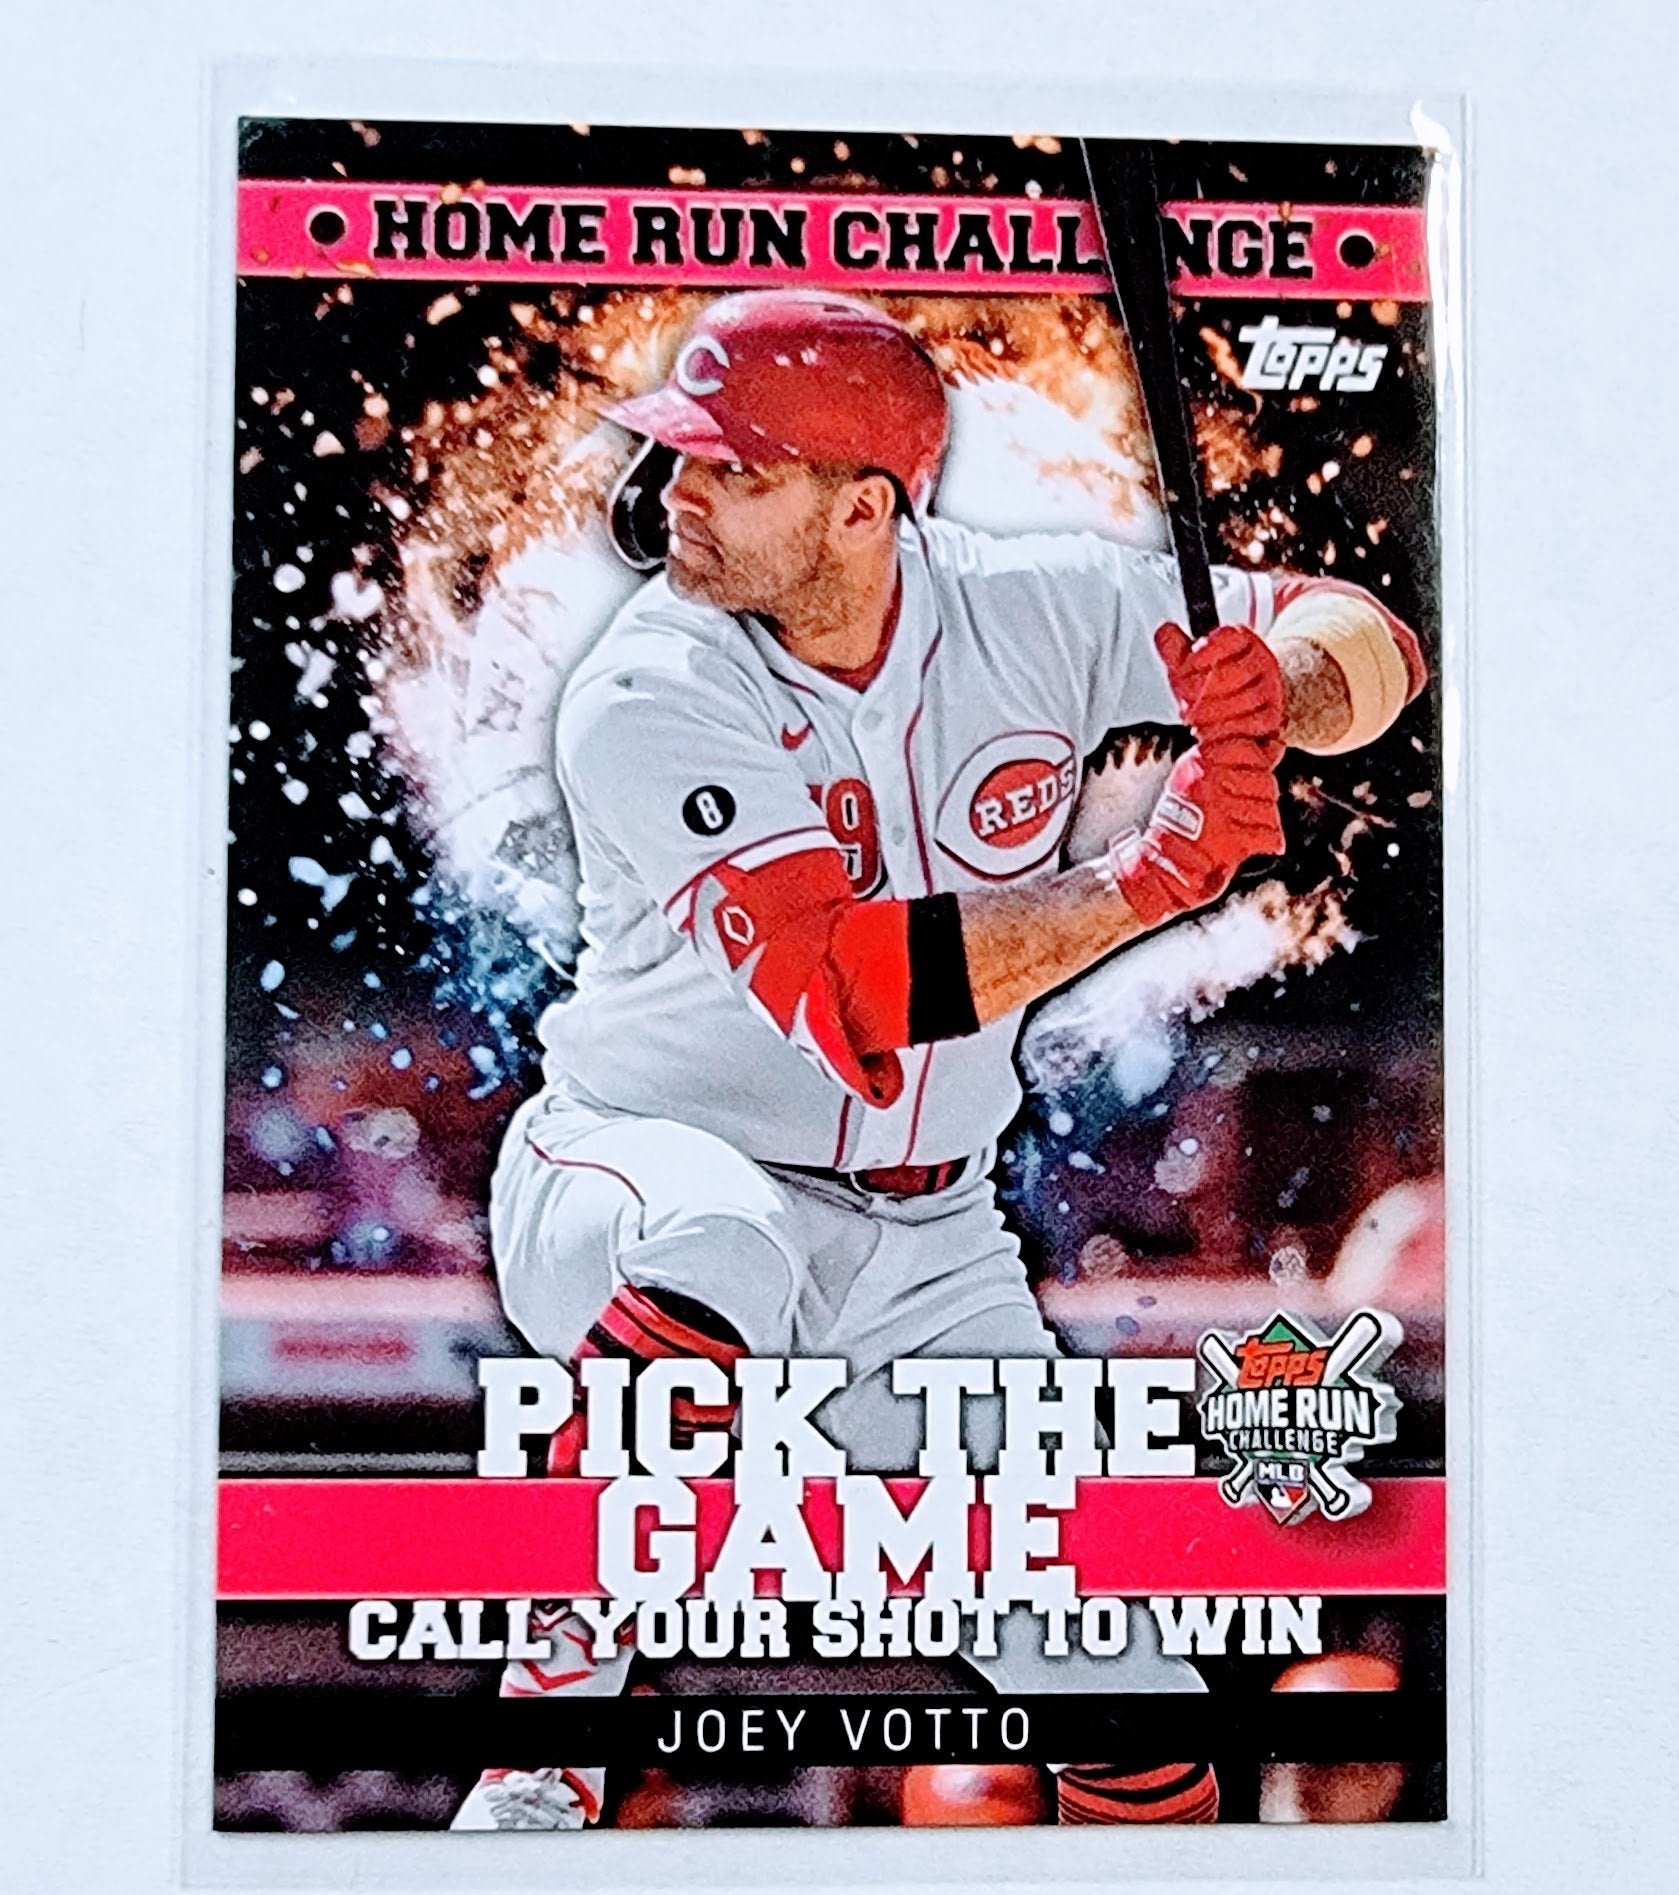 2022 Topps Joey Votto Homerun Challenge Promo Baseball Card 'Scratched' AVM1 simple Xclusive Collectibles   